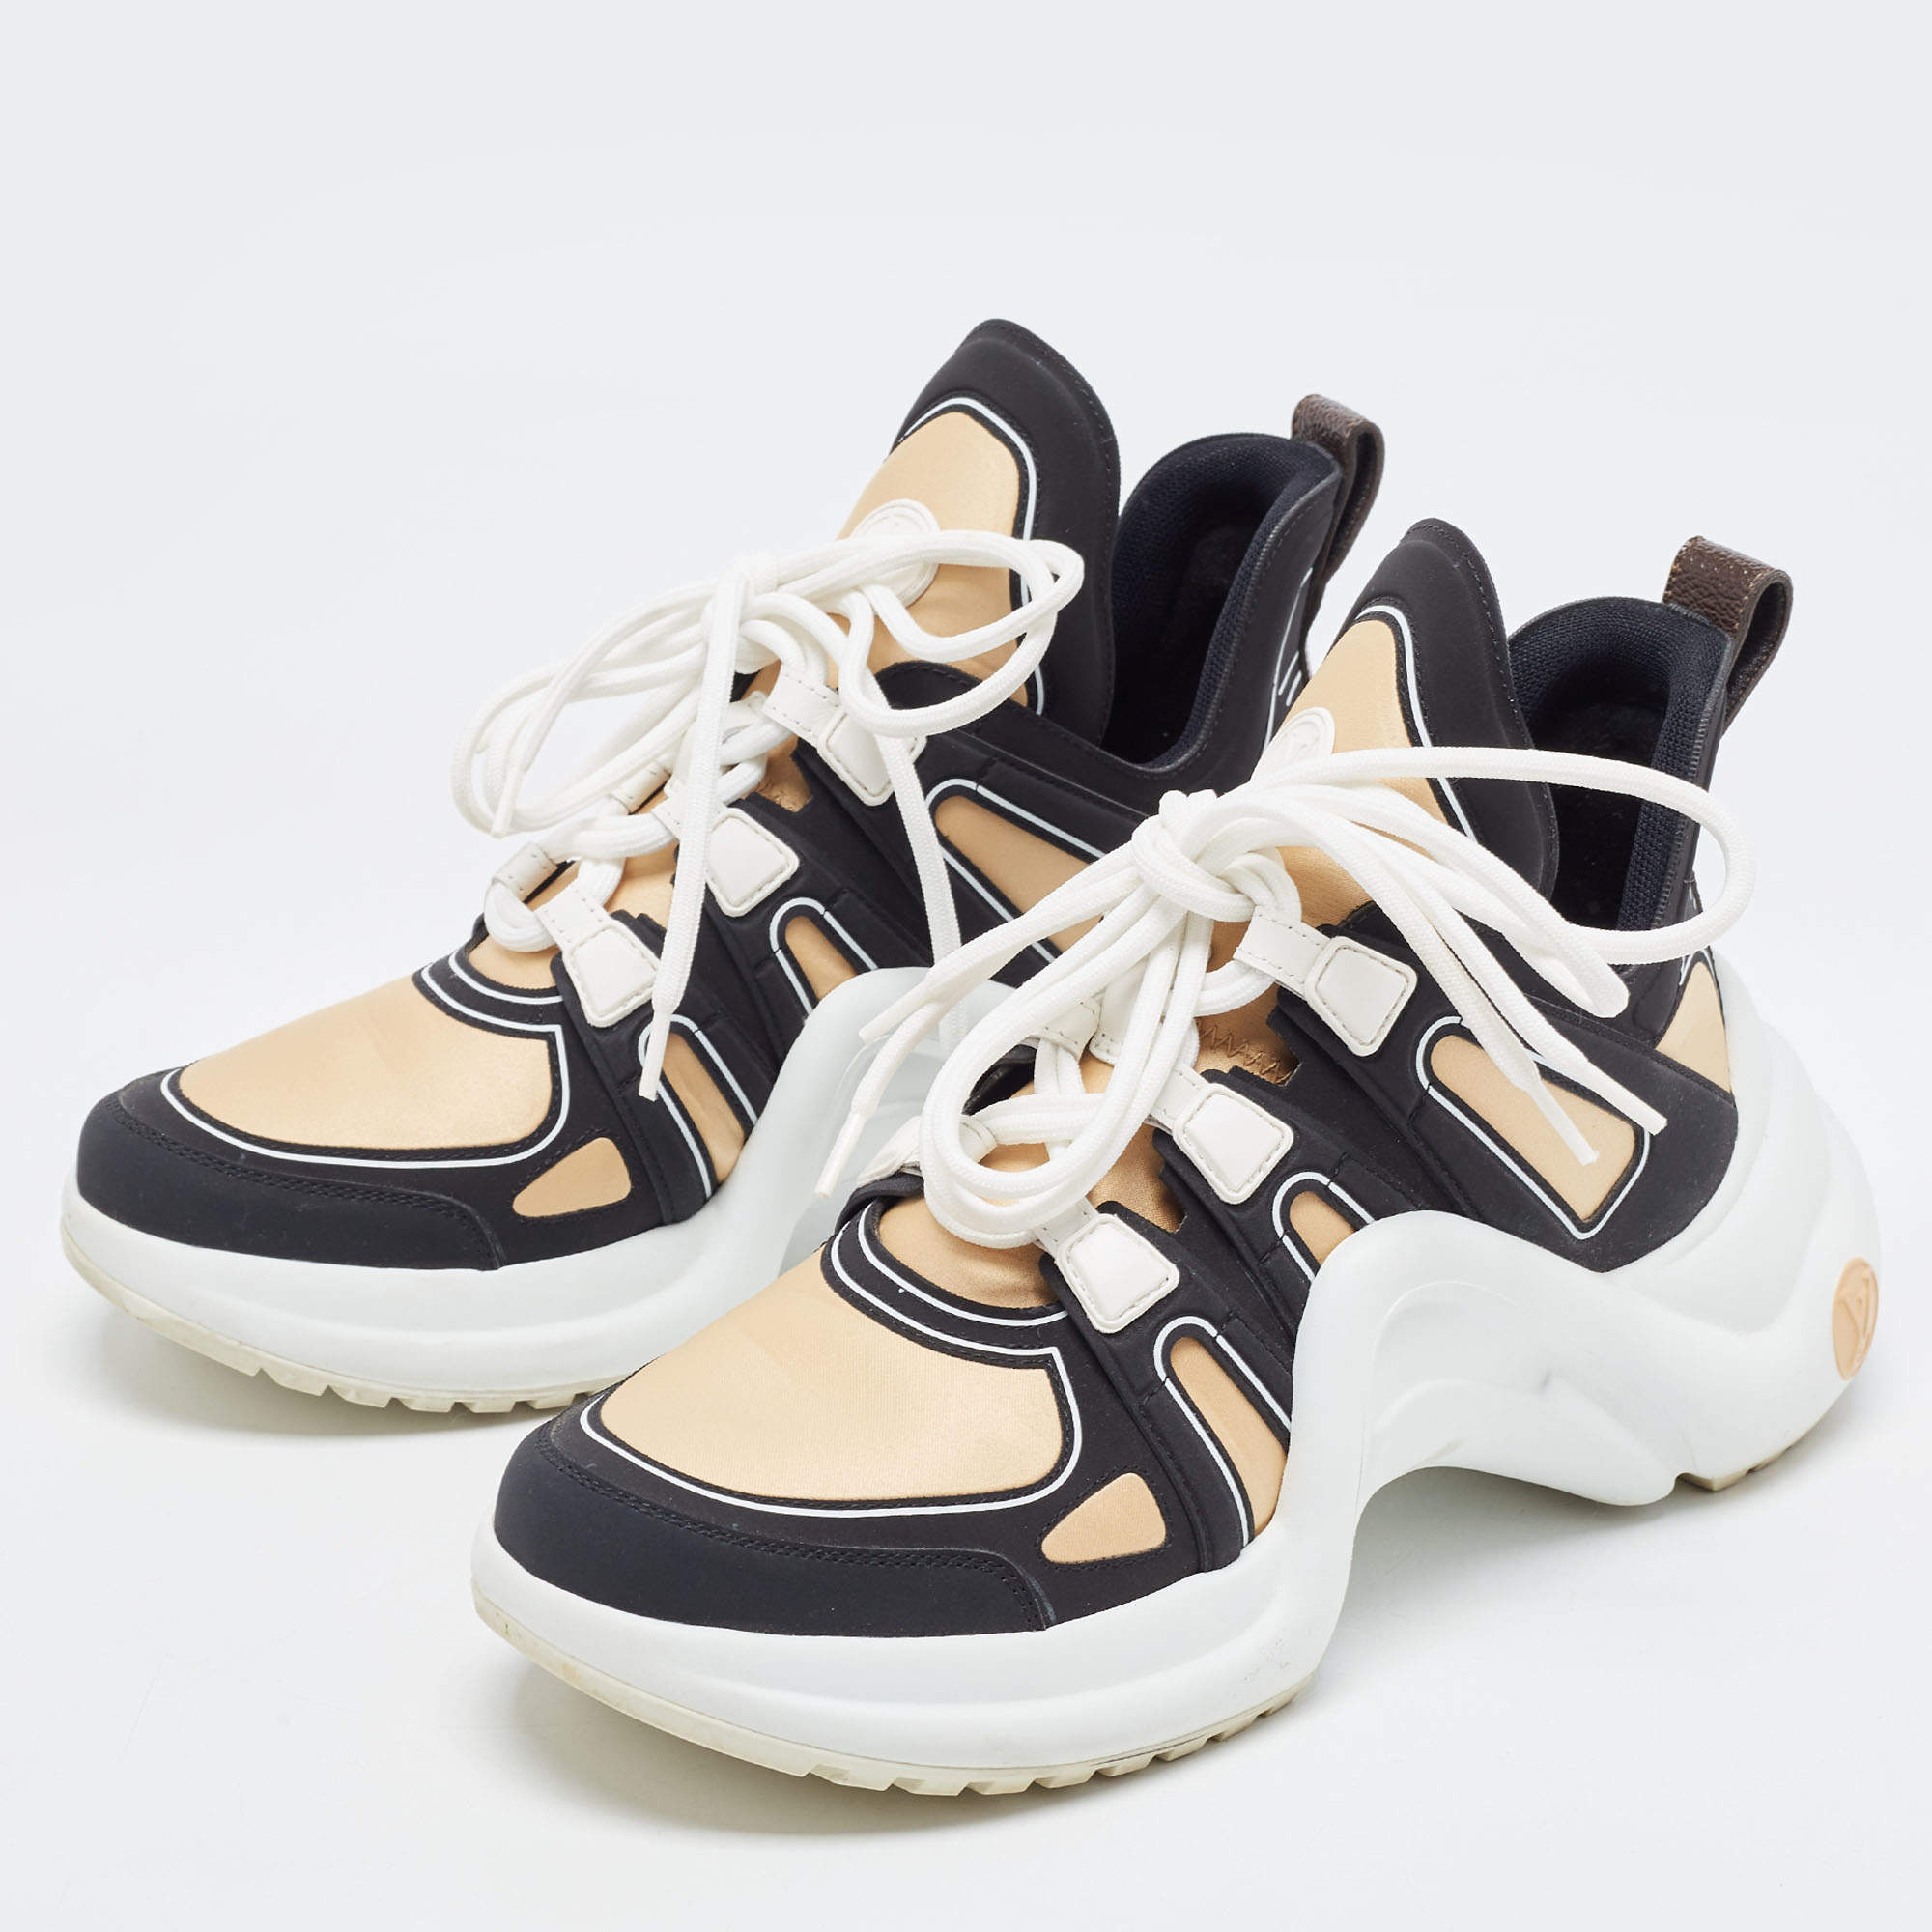 Louis Vuitton Archlight Sneakers Price In India